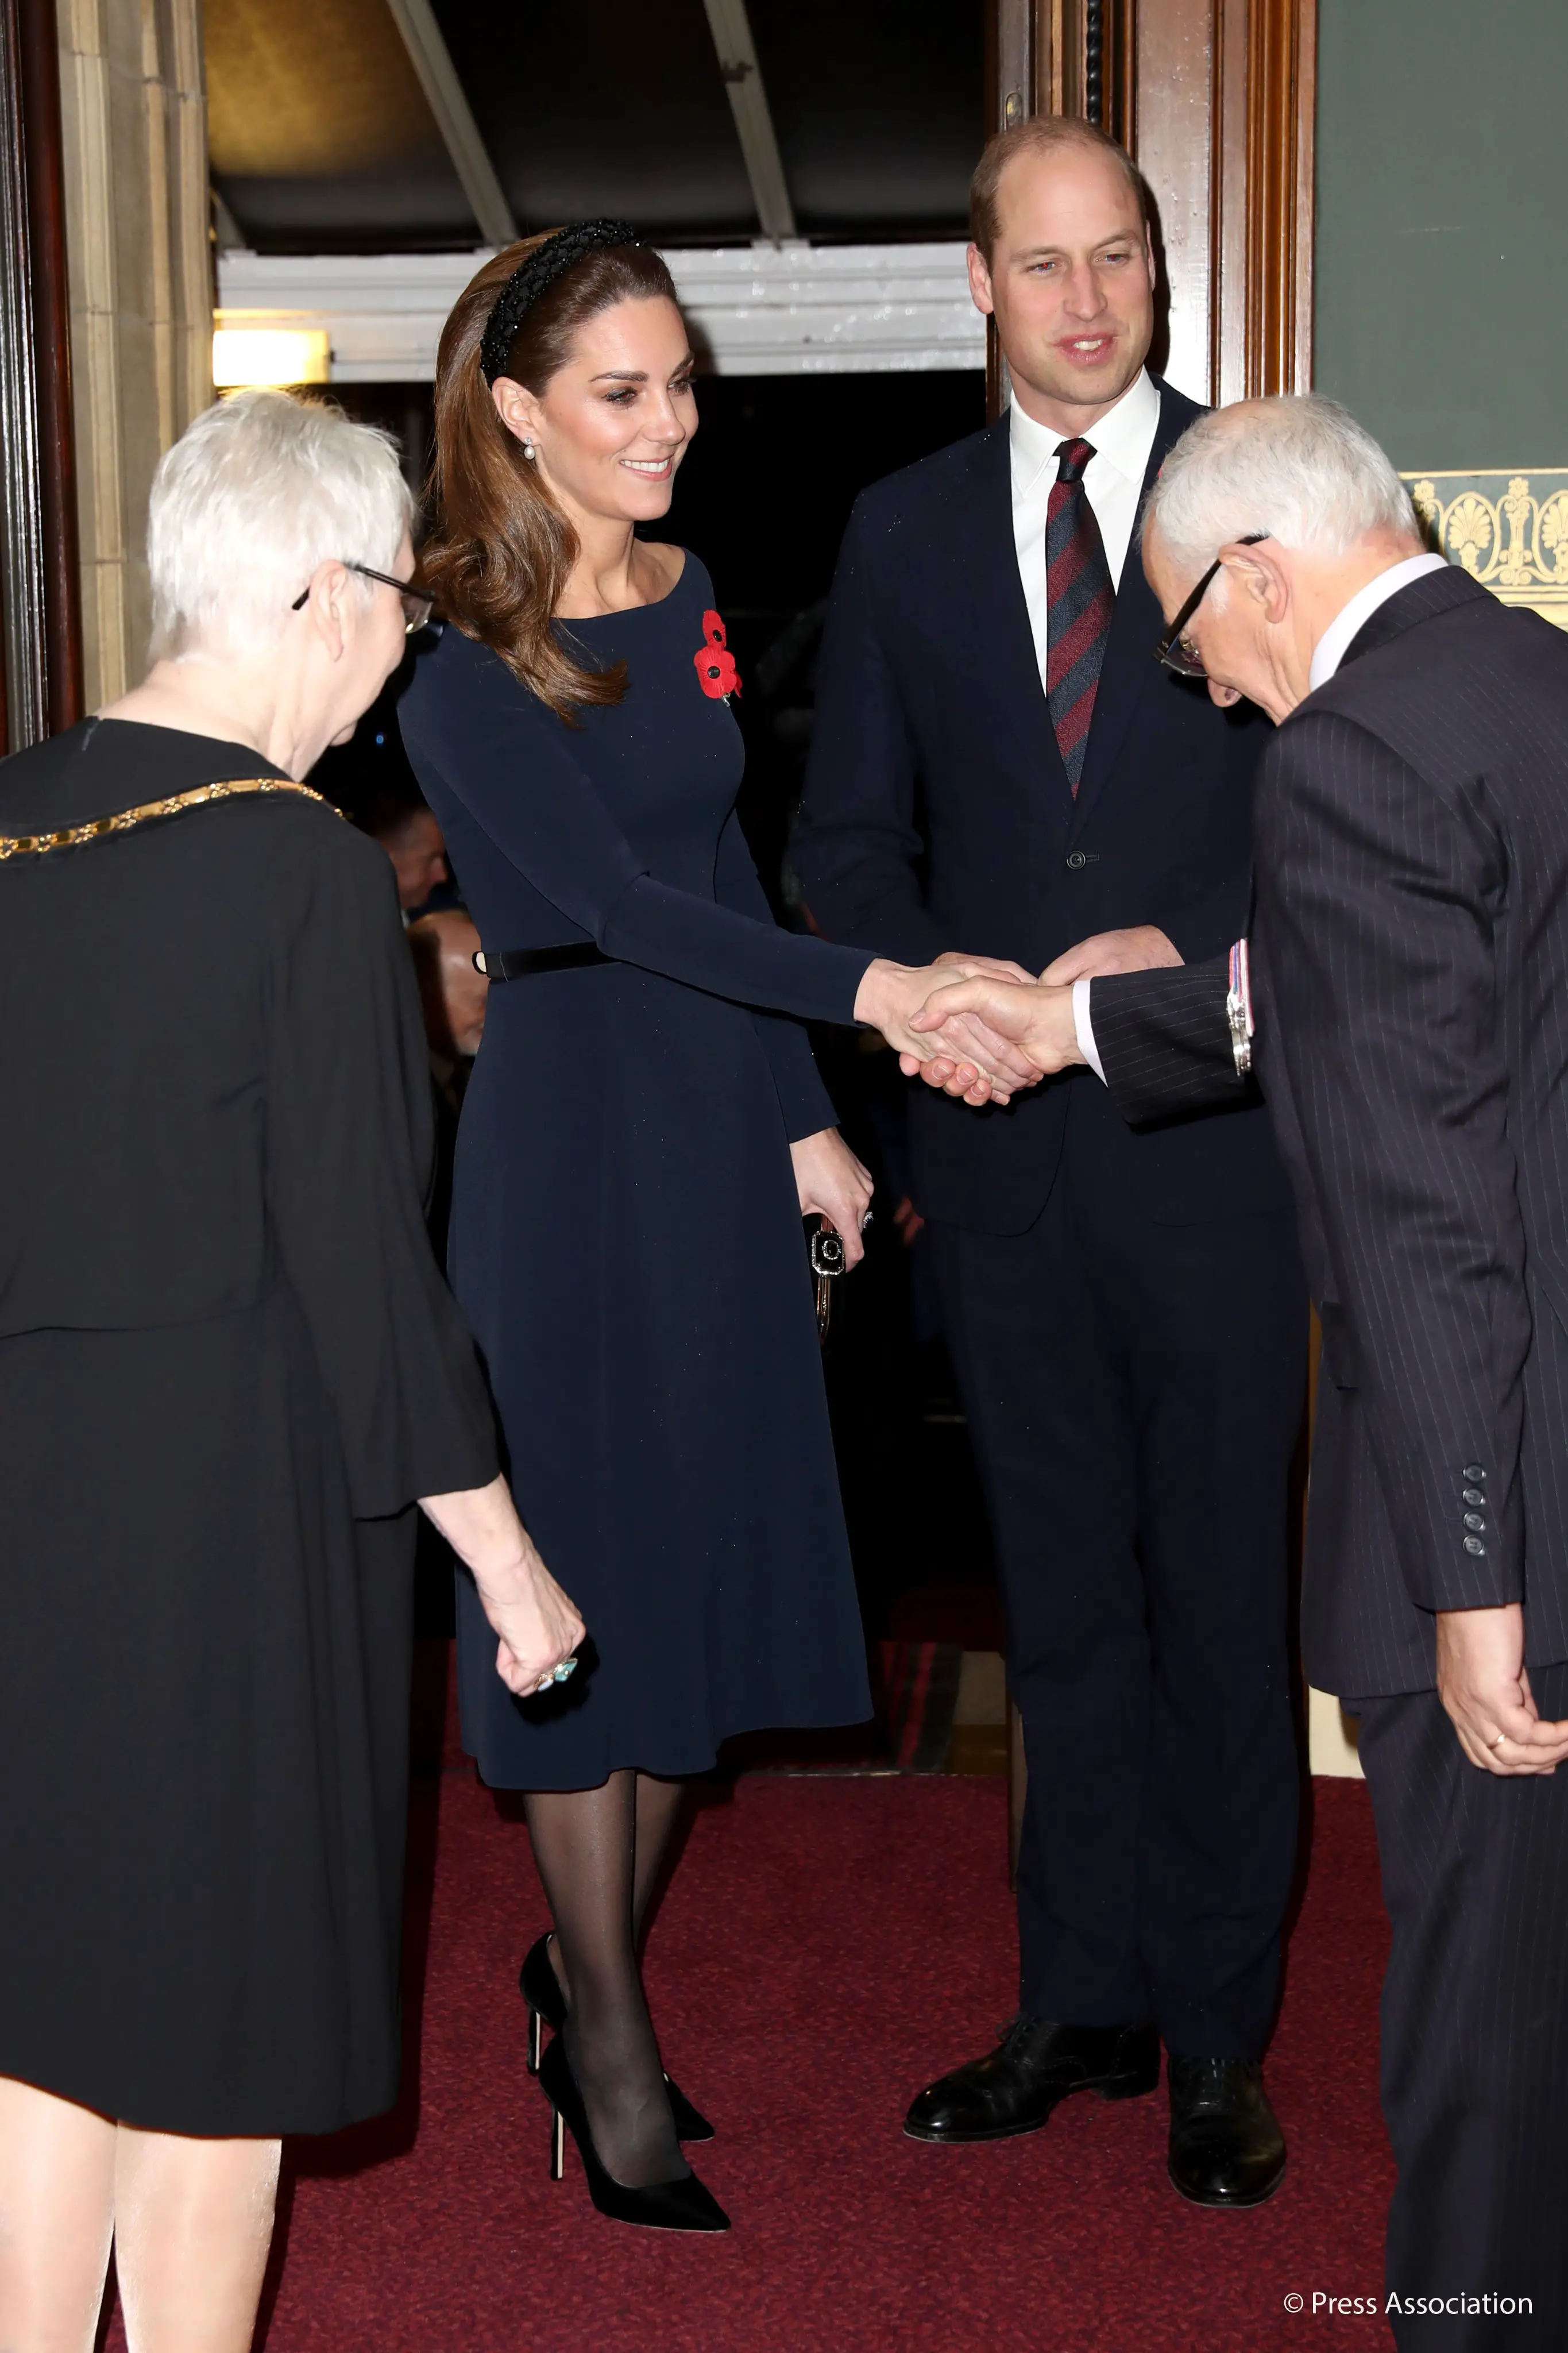 The Duchess of Cambridge arrived for the Festival of Remembrance